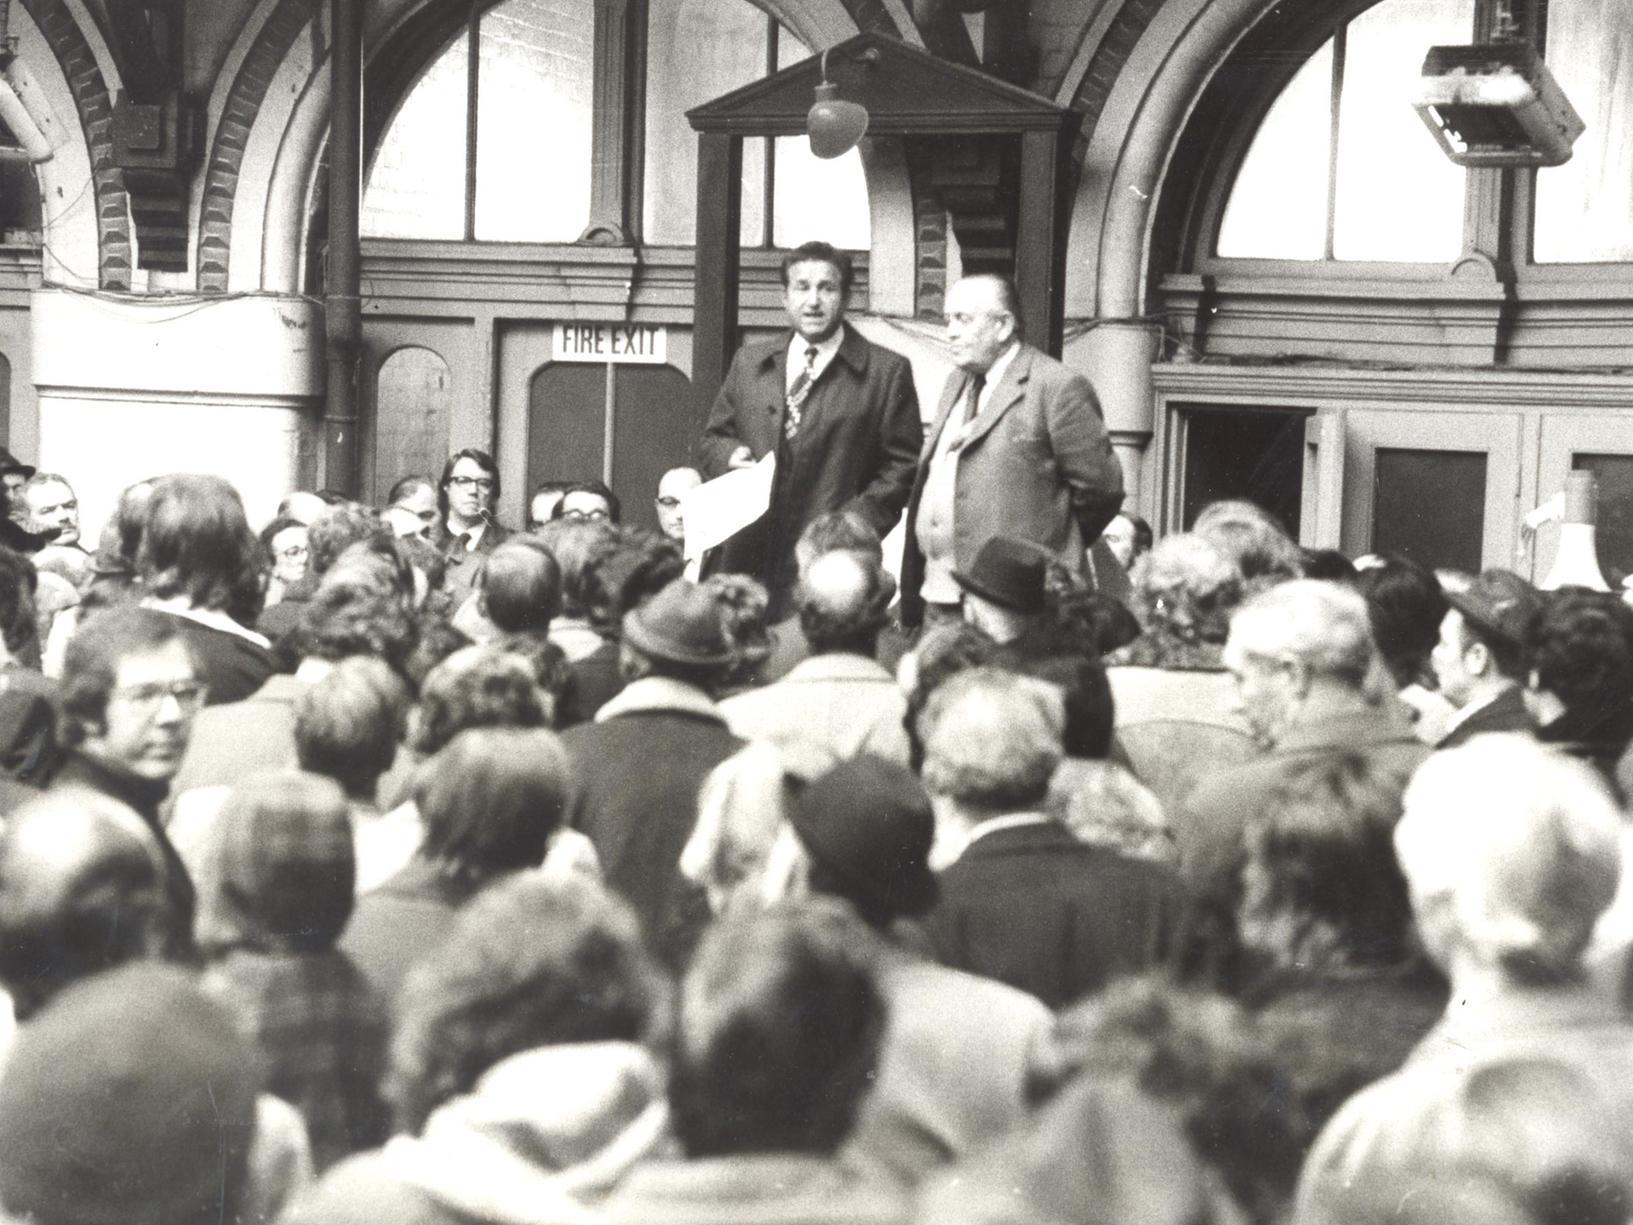 Coun Irwin Bellow, leader of Leeds City Council, and Coun Hudson talk to Kirkgate market traders at a meeting in Leeds Corn Exchange.